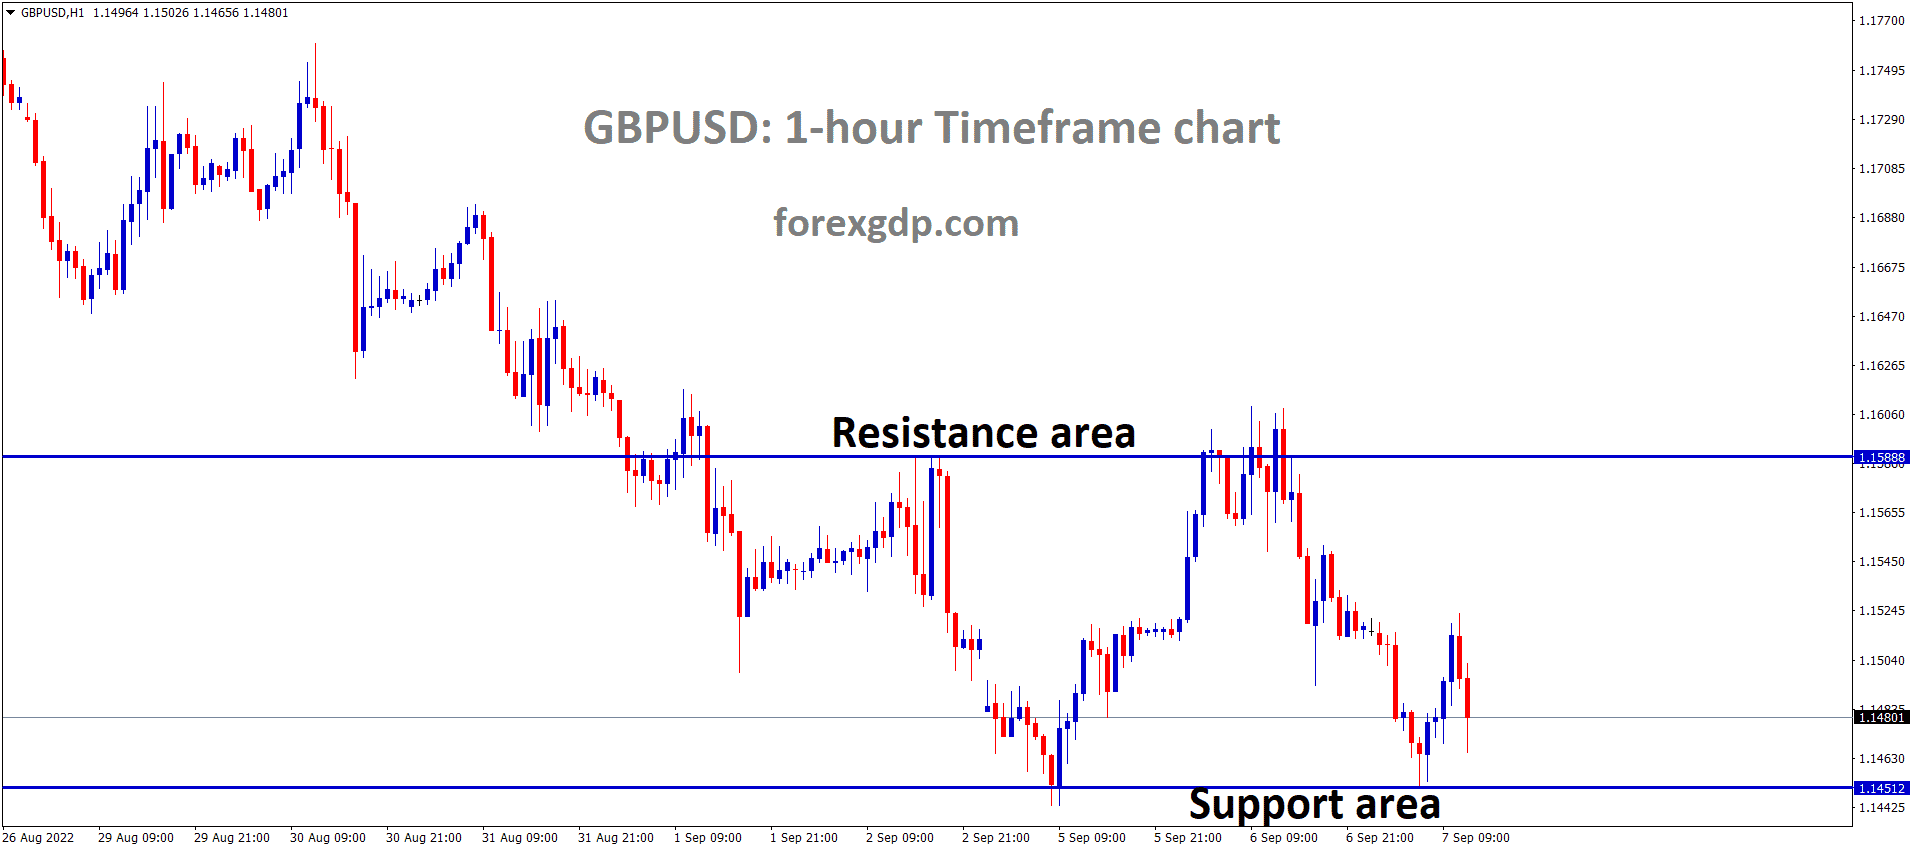 GBPUSD is moving in the Box pattern and the market has rebounded from the horizontal support area of the pattern.